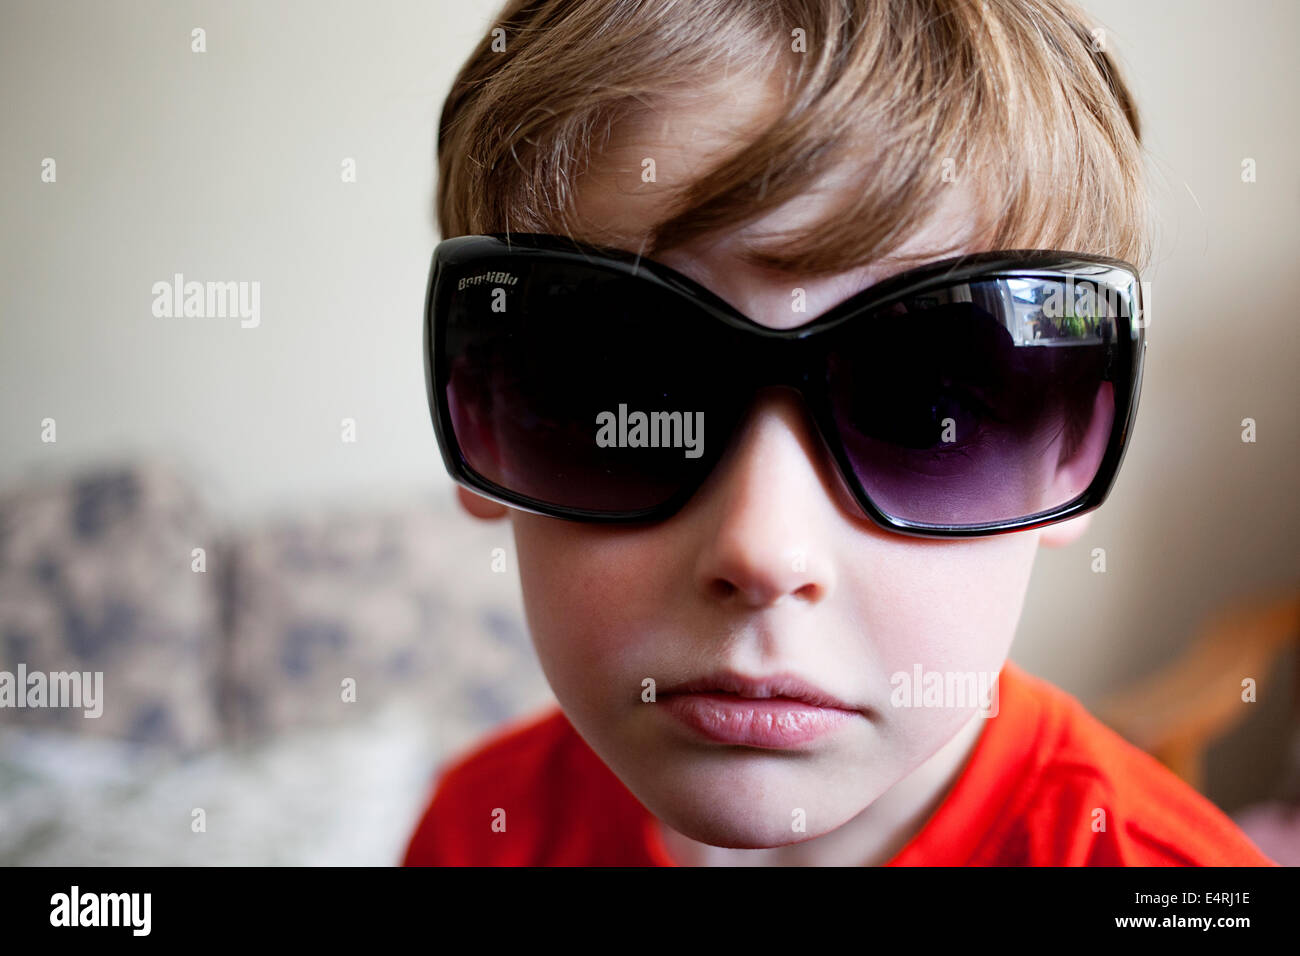 A young six year old boy wearing funny oversized dark sunglasses Stock Photo